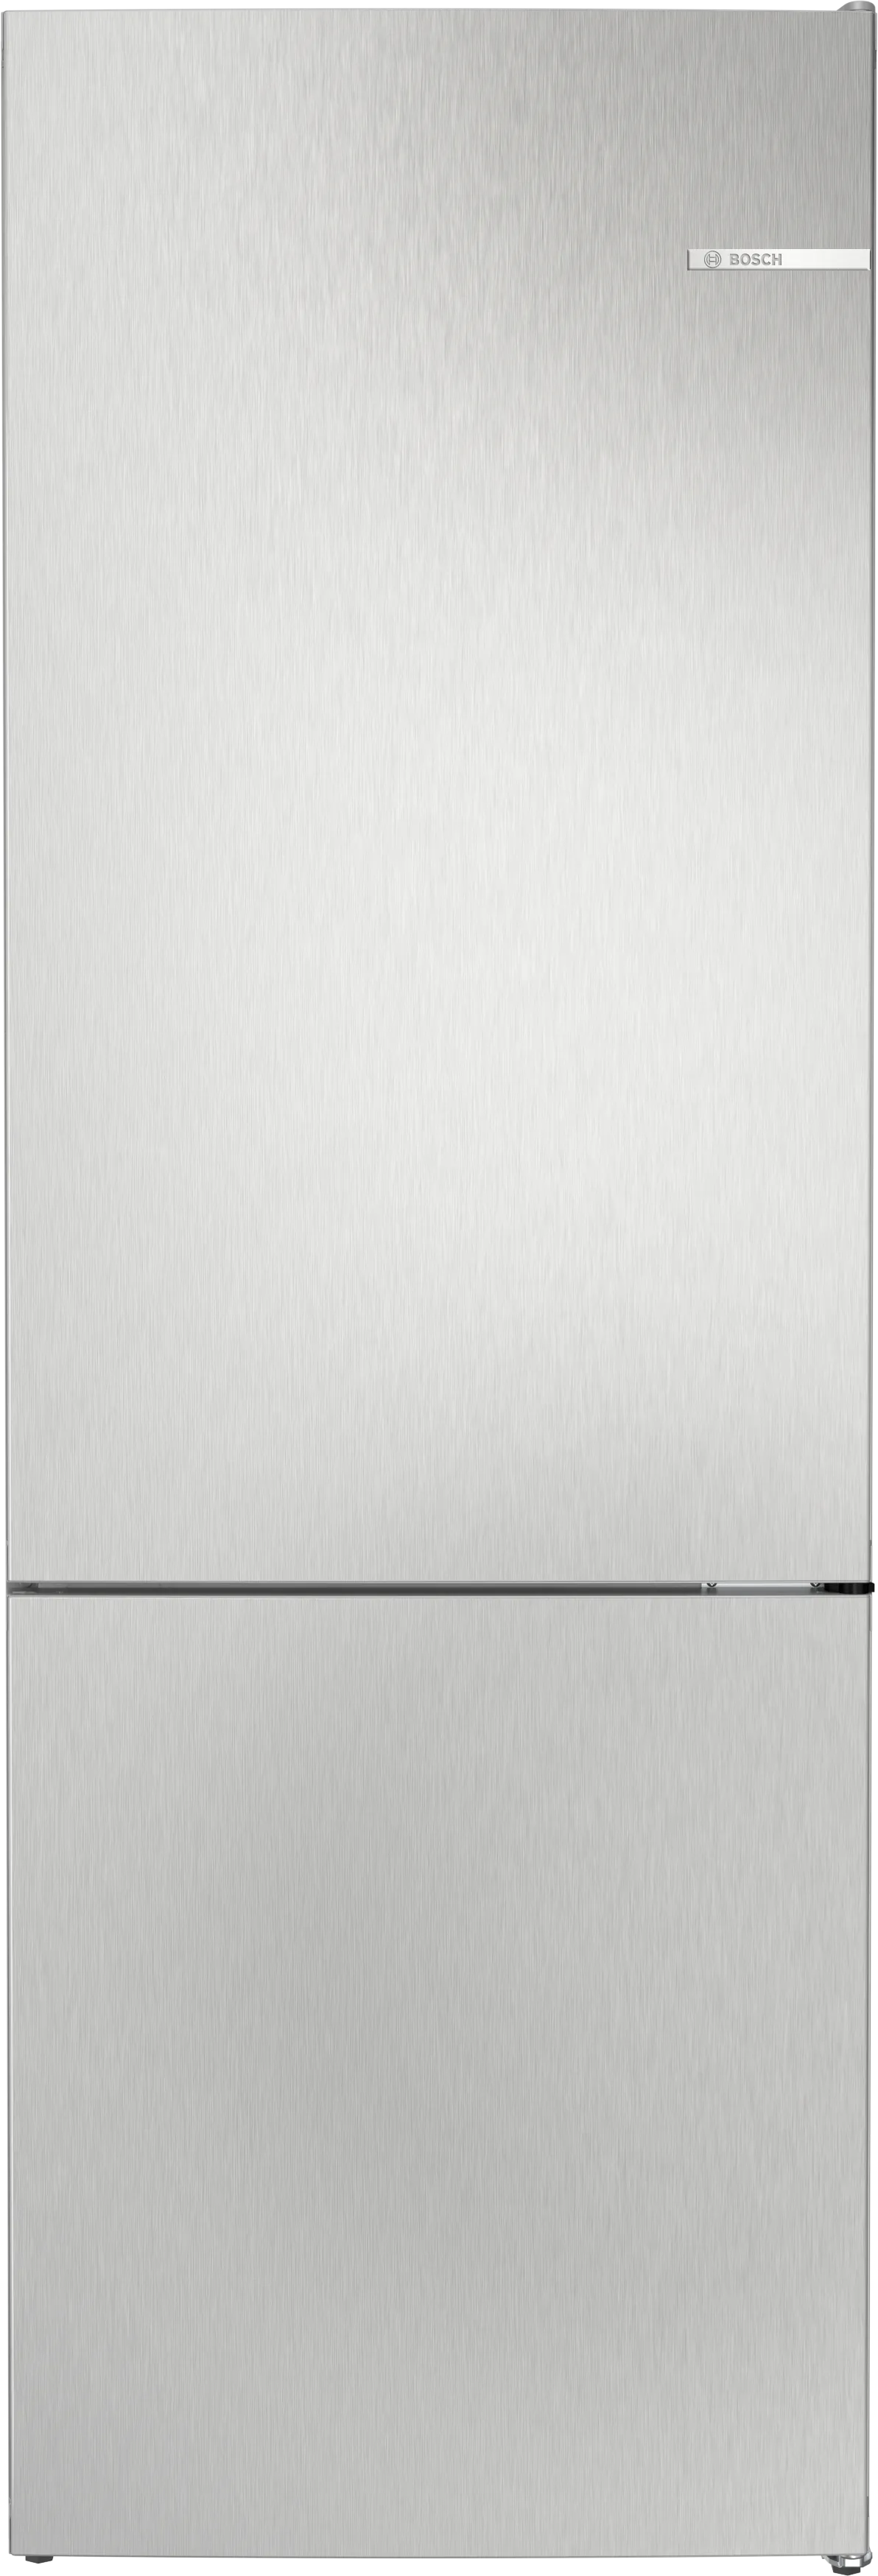 Series 4 free-standing fridge-freezer with freezer at bottom 203 x 70 cm Stainless steel look 